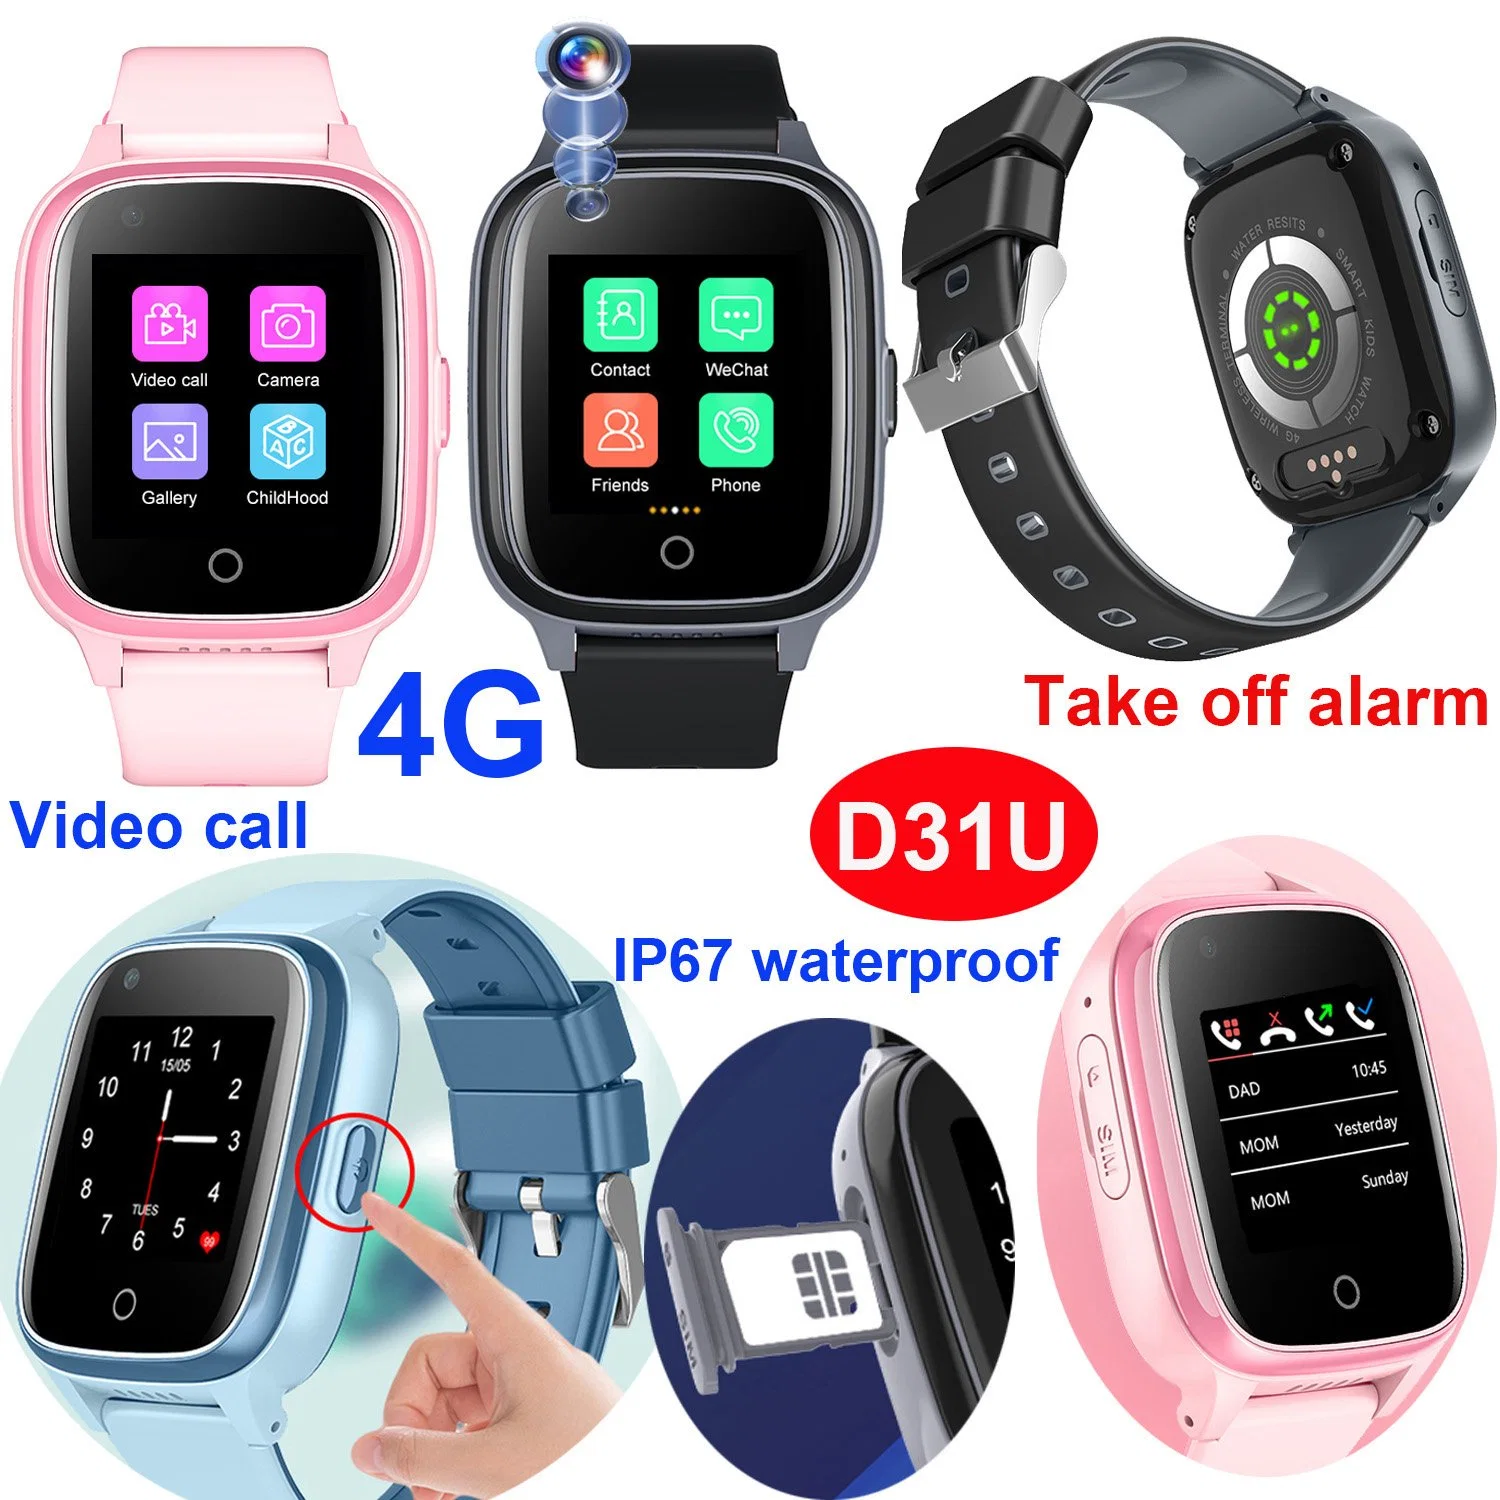 Hot Selling 4G IP67 Waterproof Take off Alarm Child Kids SOS Call Gift Smart Watch GPS Tracker Phone with Video Call for safety monitoring D31U